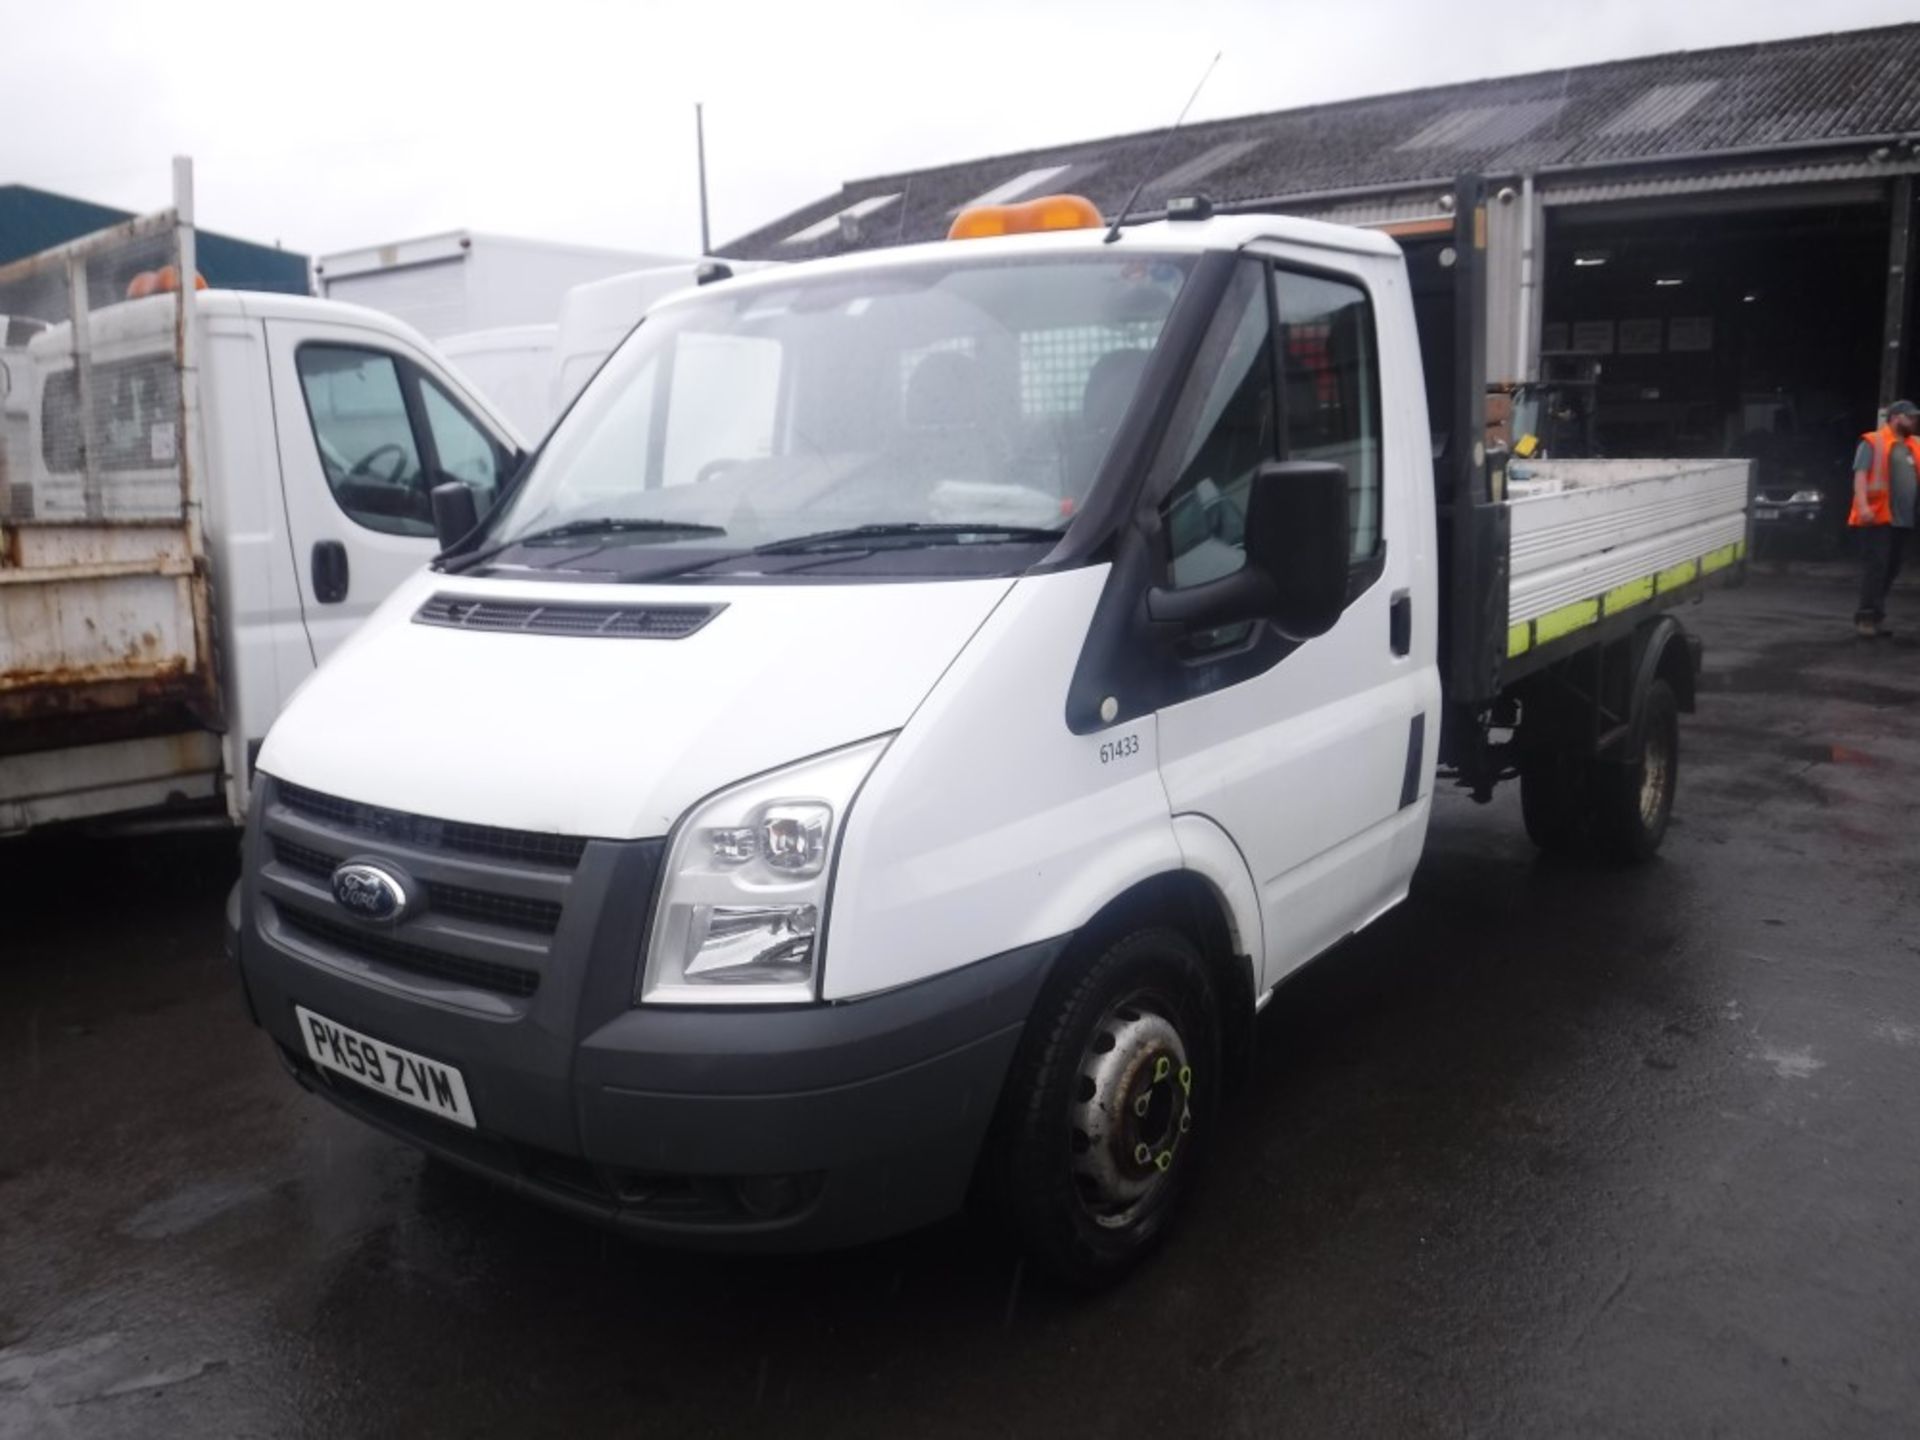 59 reg FORD TRANSIT 140 T350M RWD TIPPER (DIRECT COUNCIL) 1ST REG 01/10, 93825M, V5 HERE, 1 OWNER - Image 2 of 5